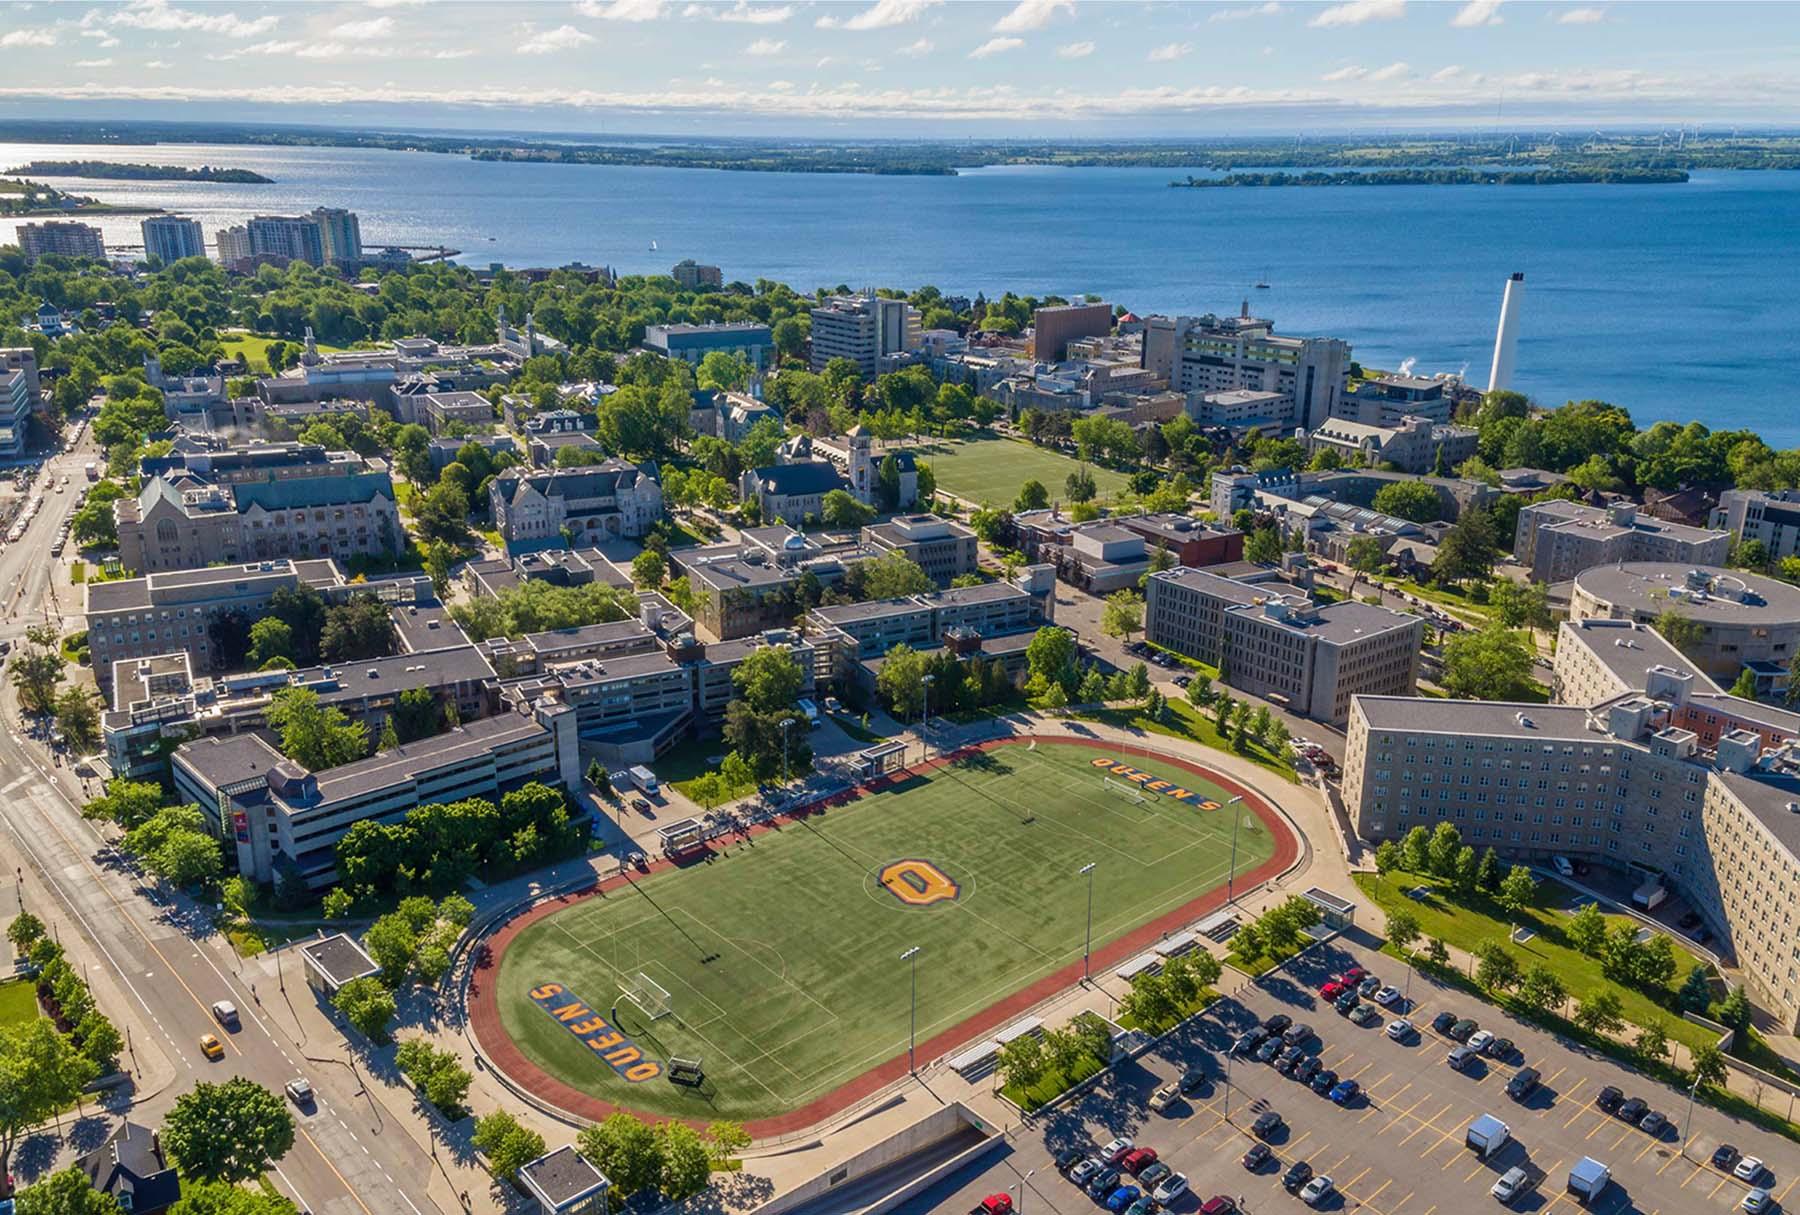 Drone photo of Queen's campus featuring Tindall field